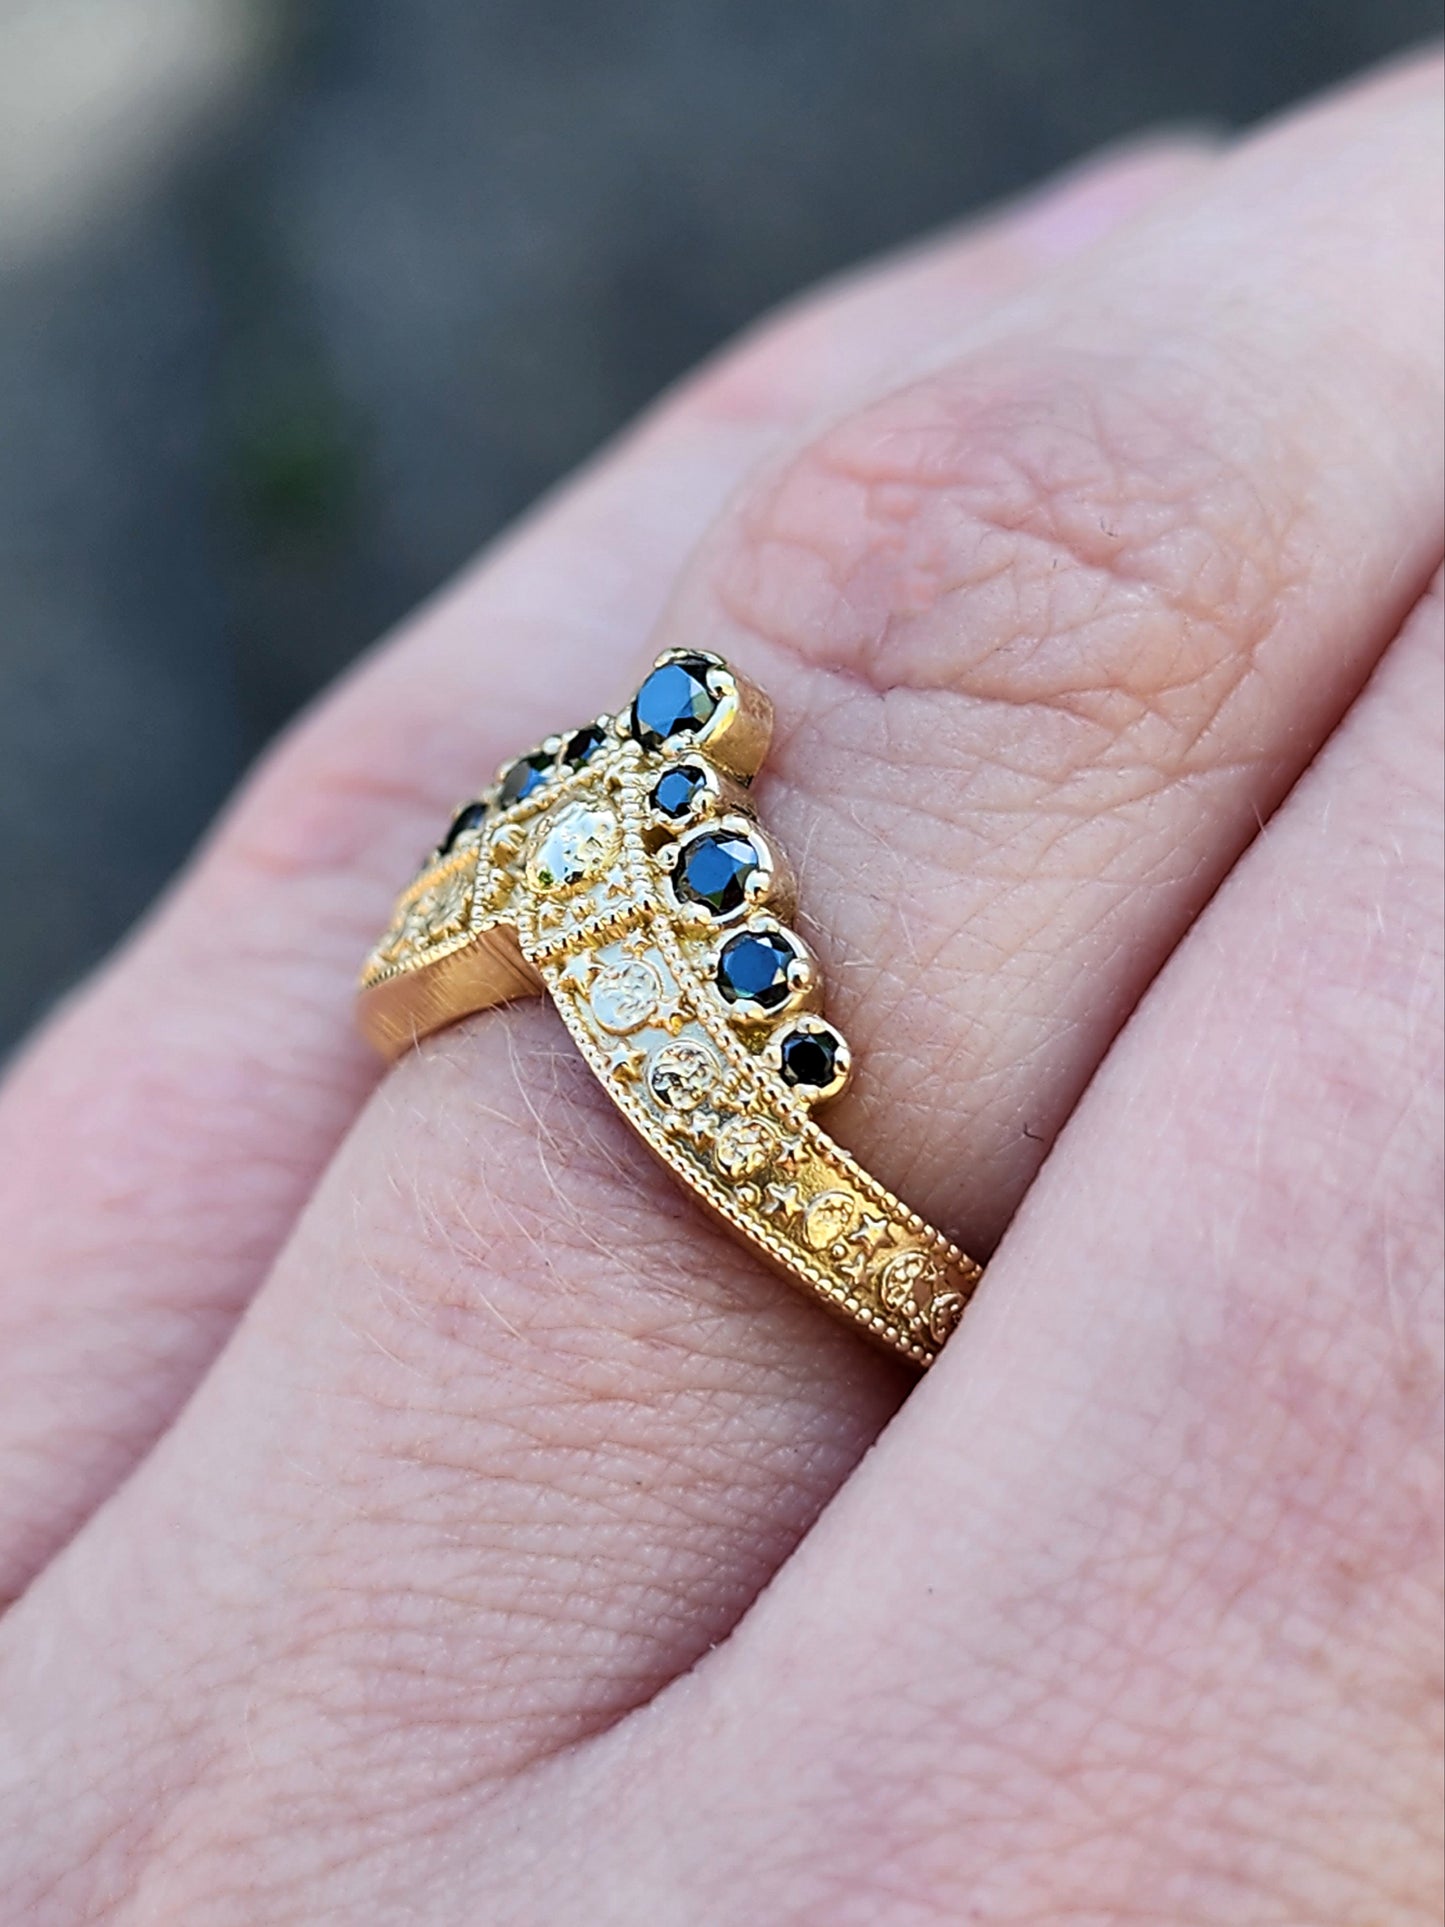 Ready to Ship Size 6-8 - Black Diamond Luna Diadem Chevron Wedding Band with Moon Phases and Full Moon and Stardust - Stacking Celestial Unique Gold Ring